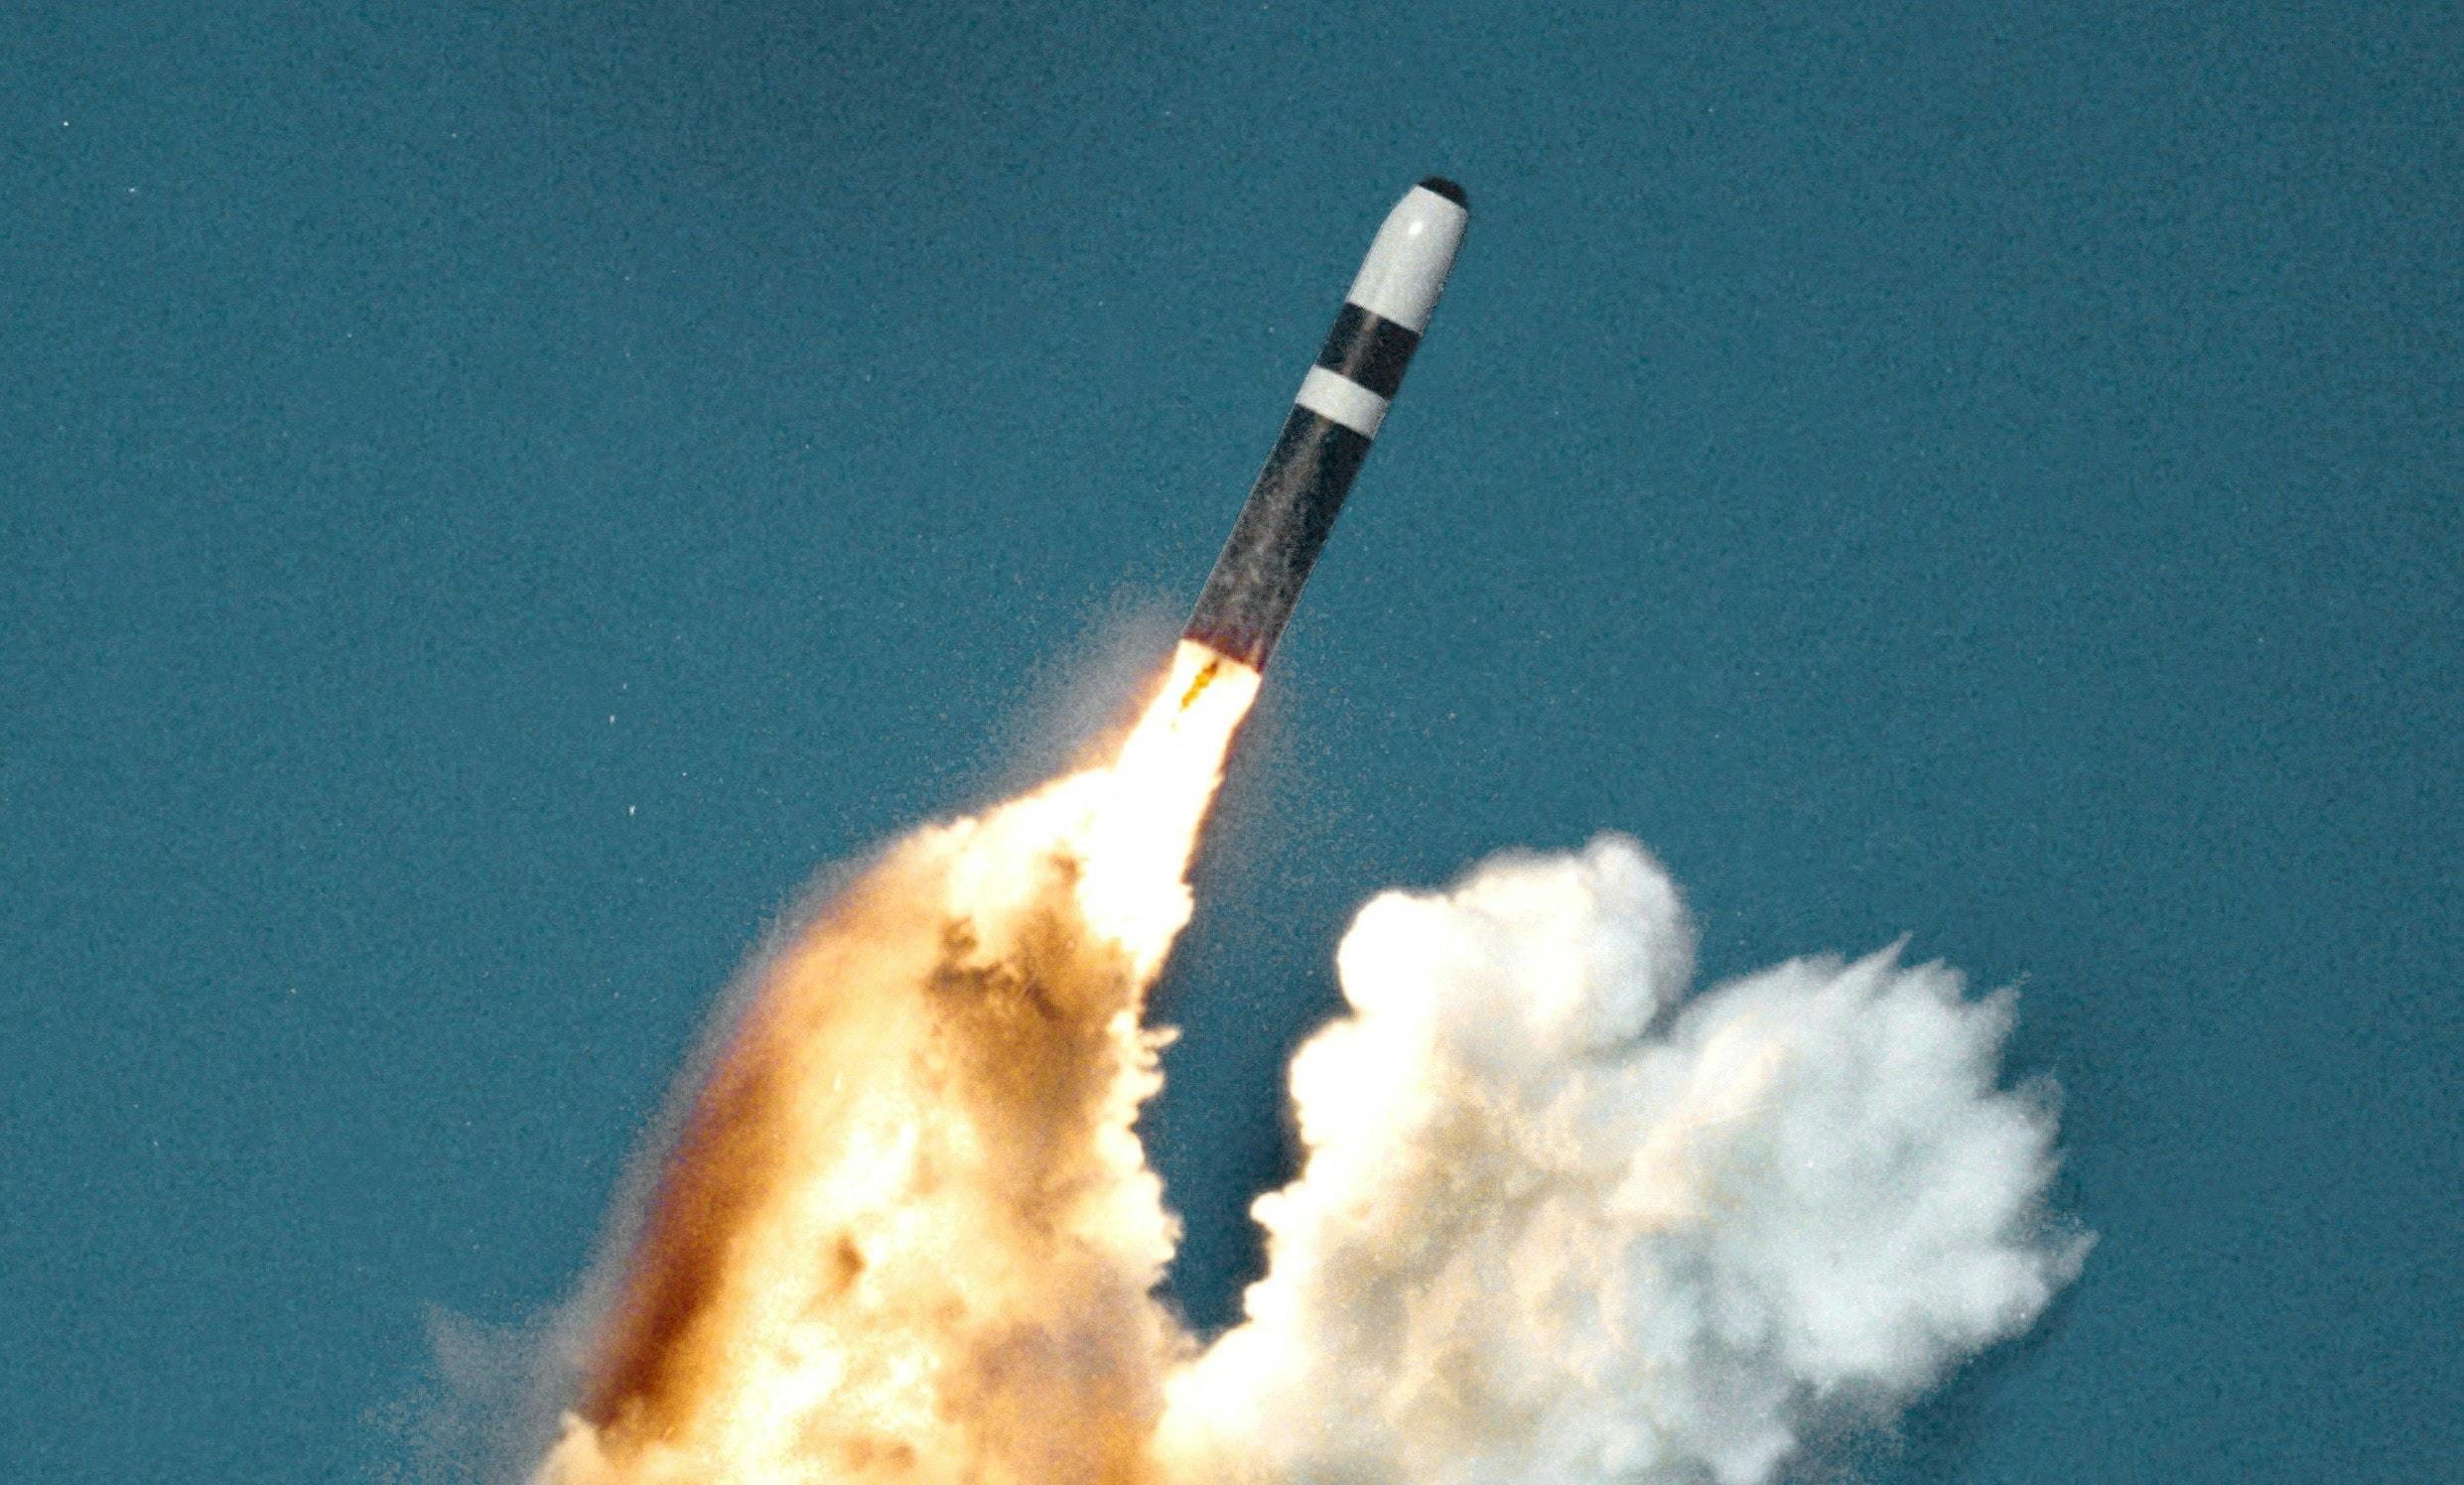 No, America doesn’t control Britain’s nuclear weapons